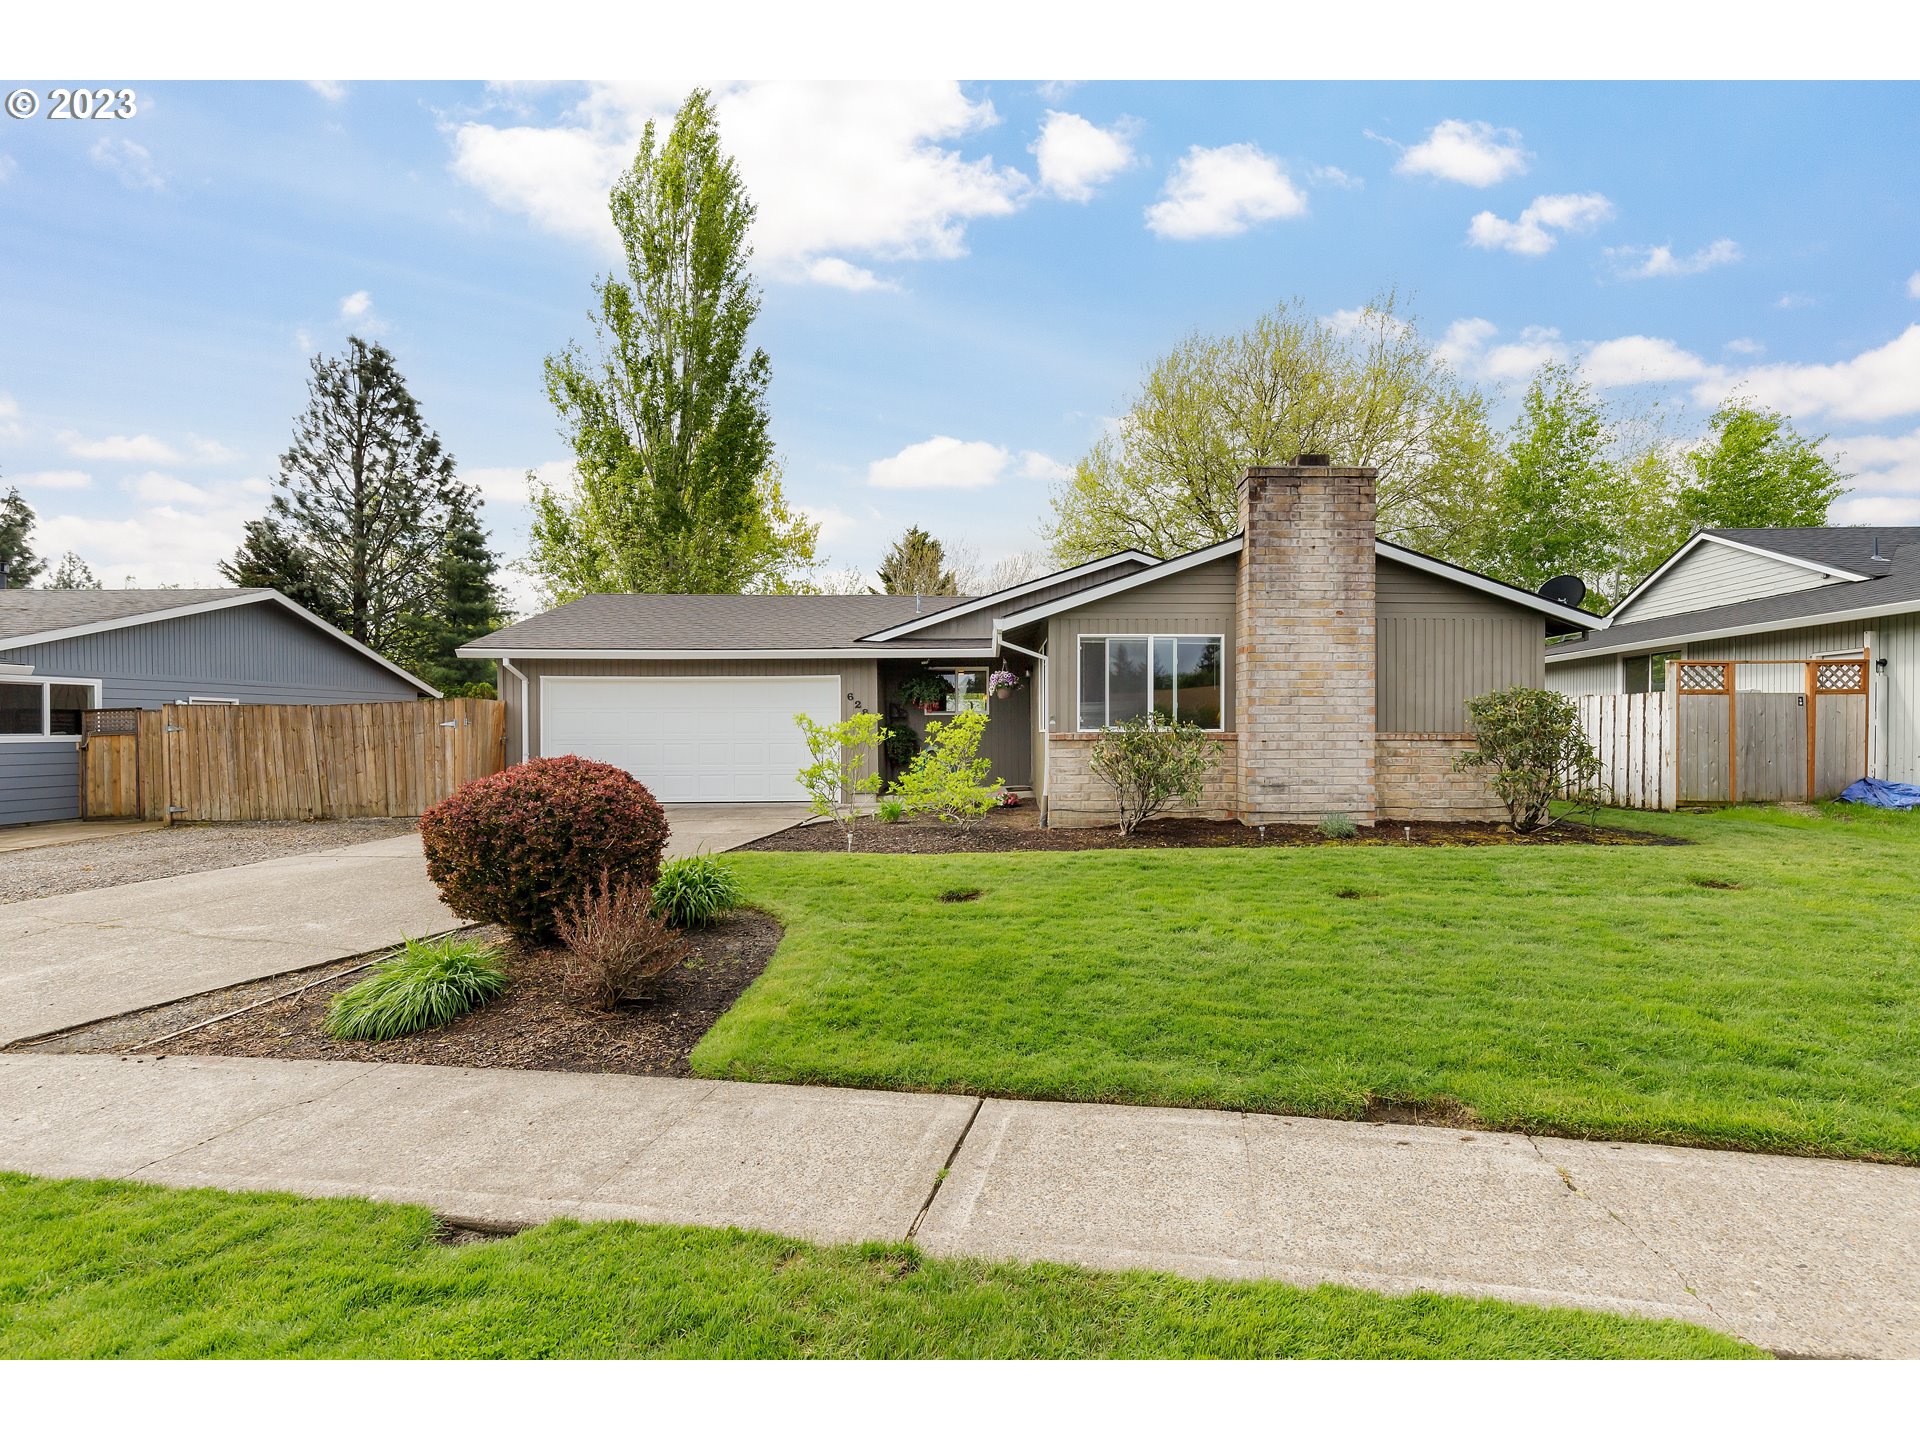 628 SE 17TH ST, Troutdale OR 97060